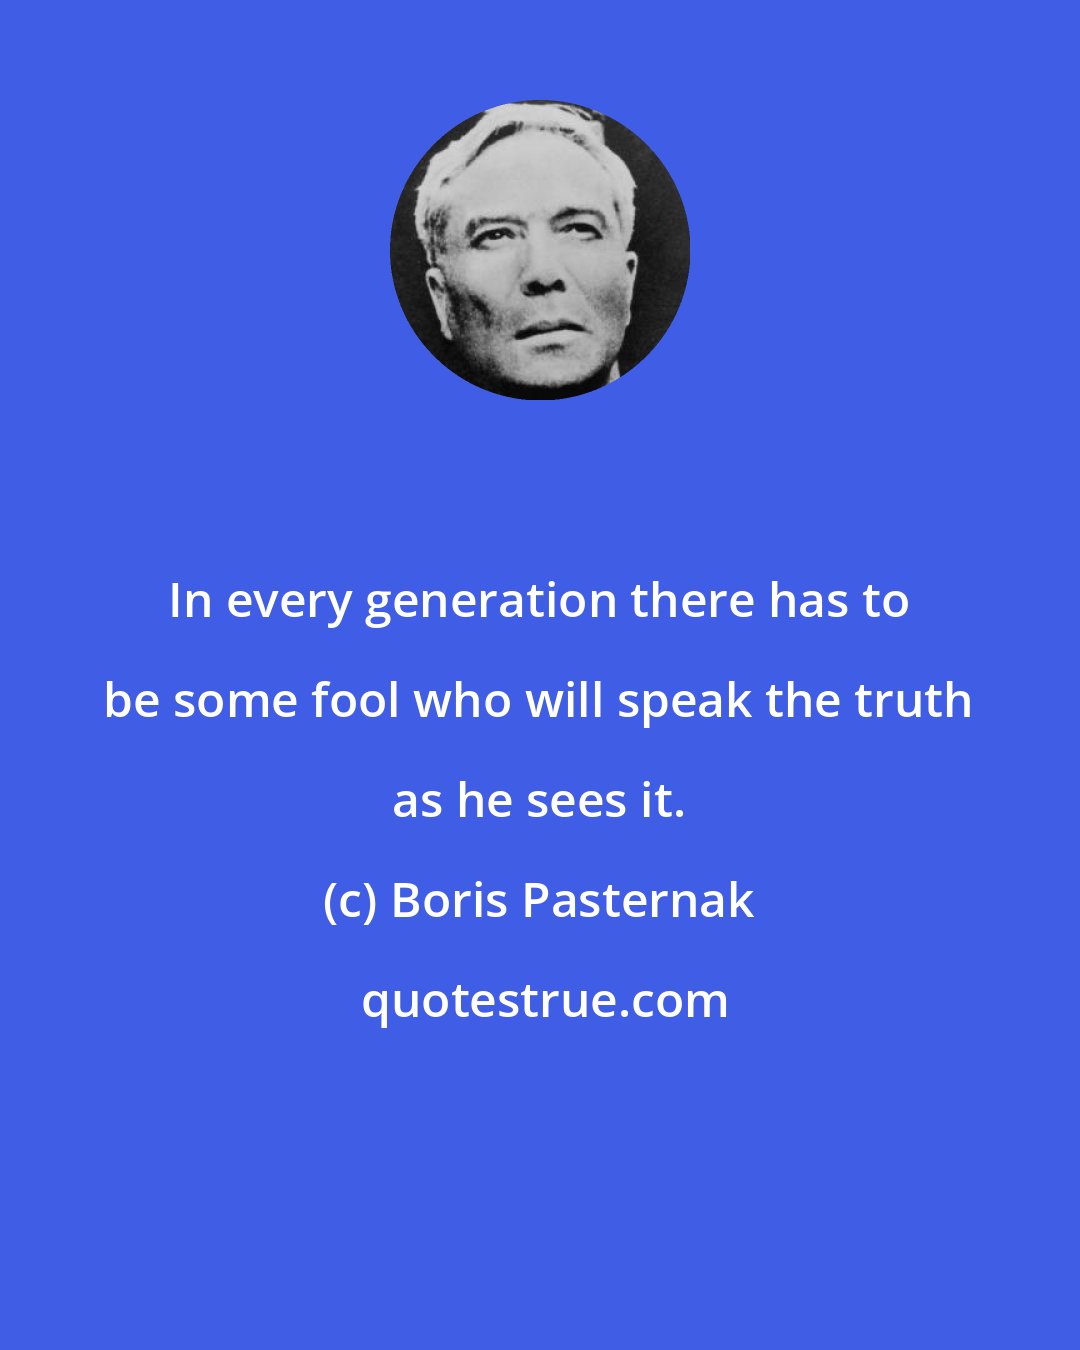 Boris Pasternak: In every generation there has to be some fool who will speak the truth as he sees it.